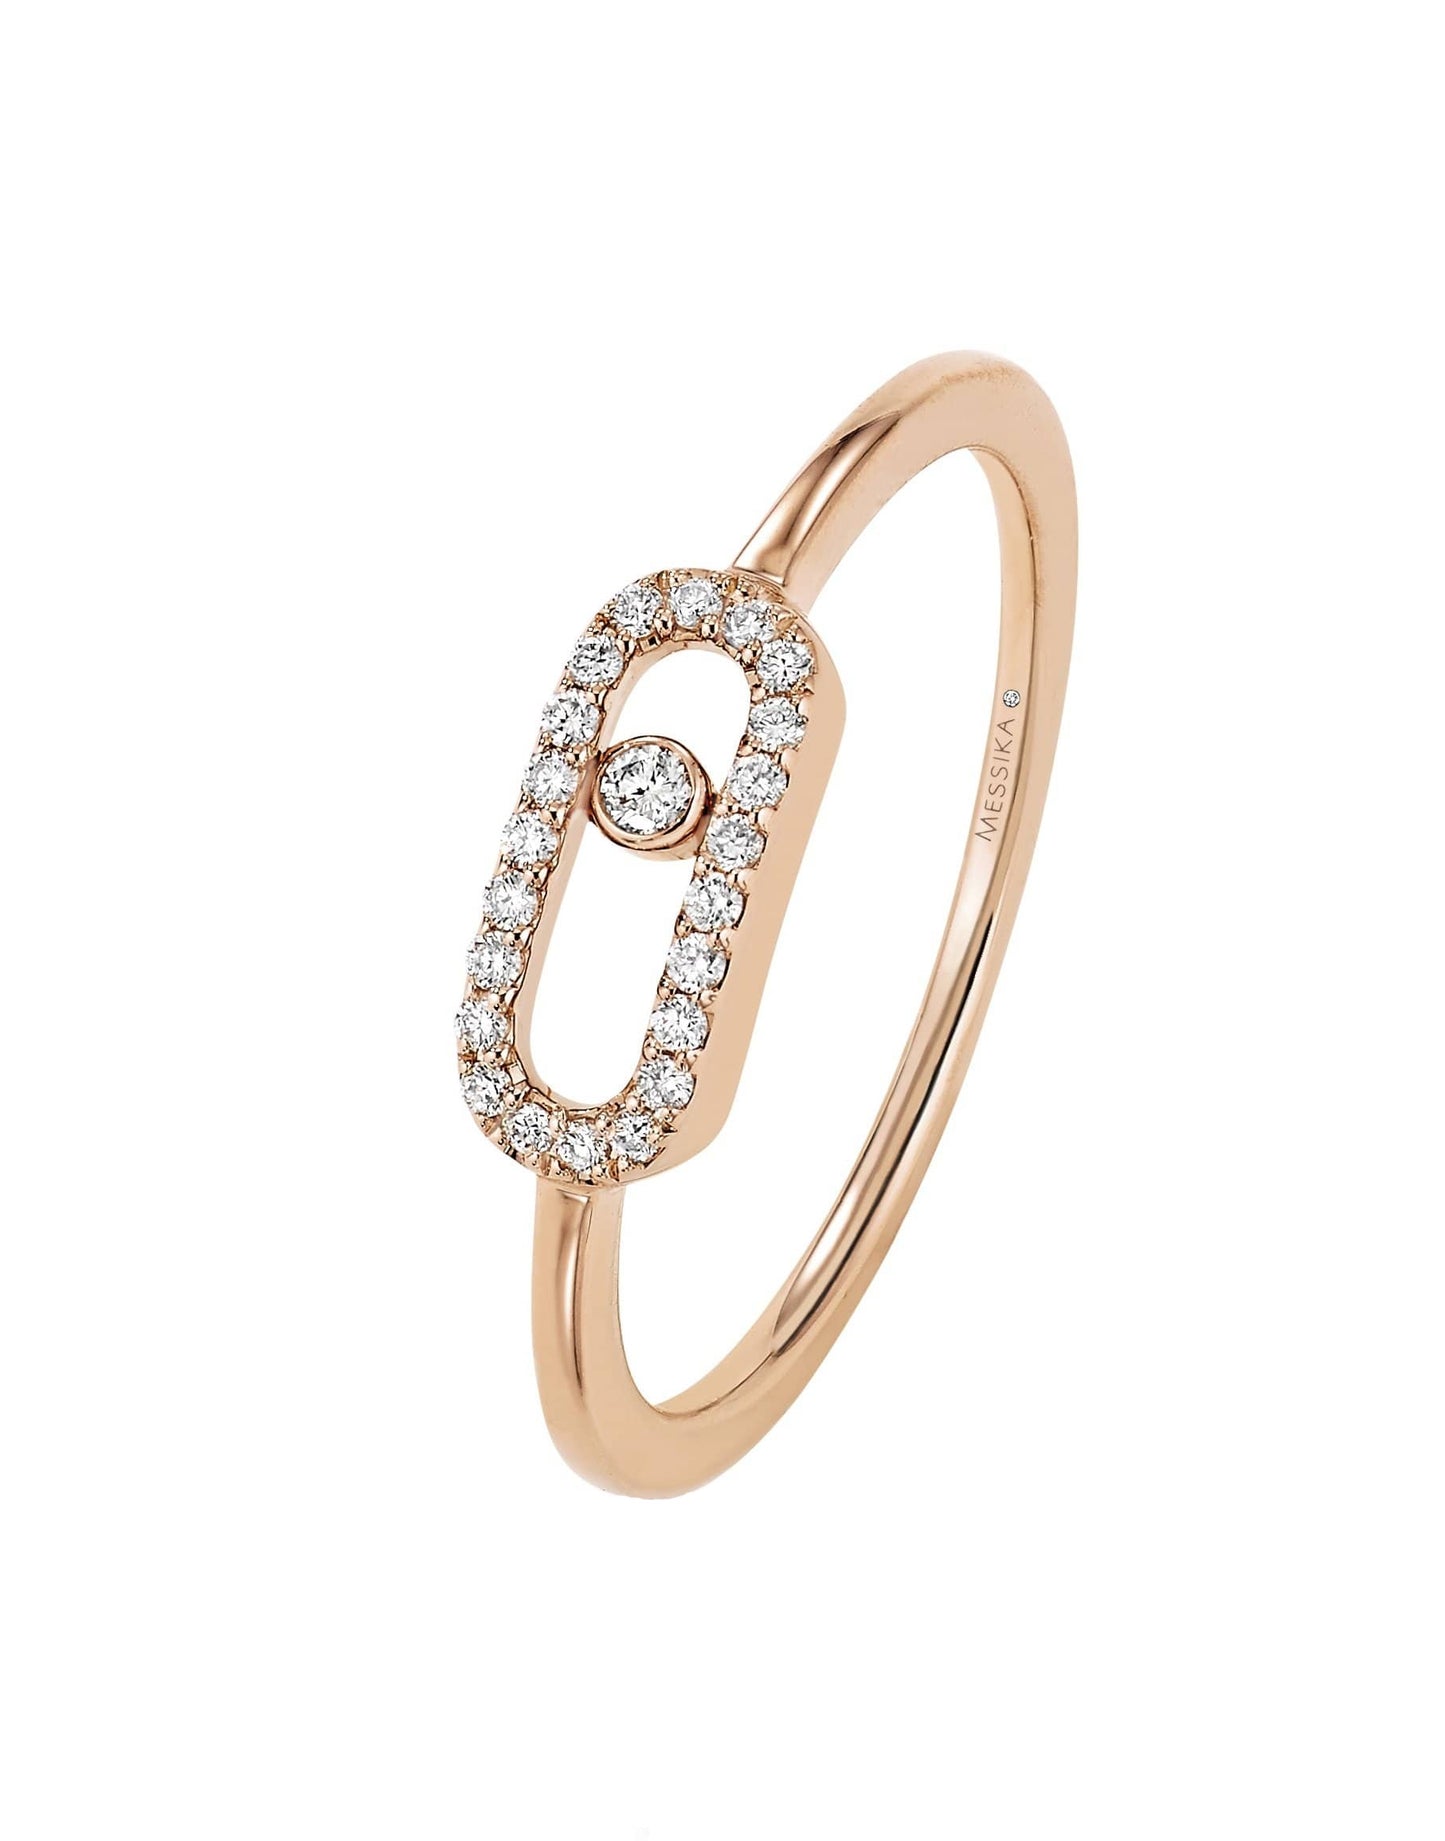 MESSIKA-Move Uno Ring-ROSE GOLD